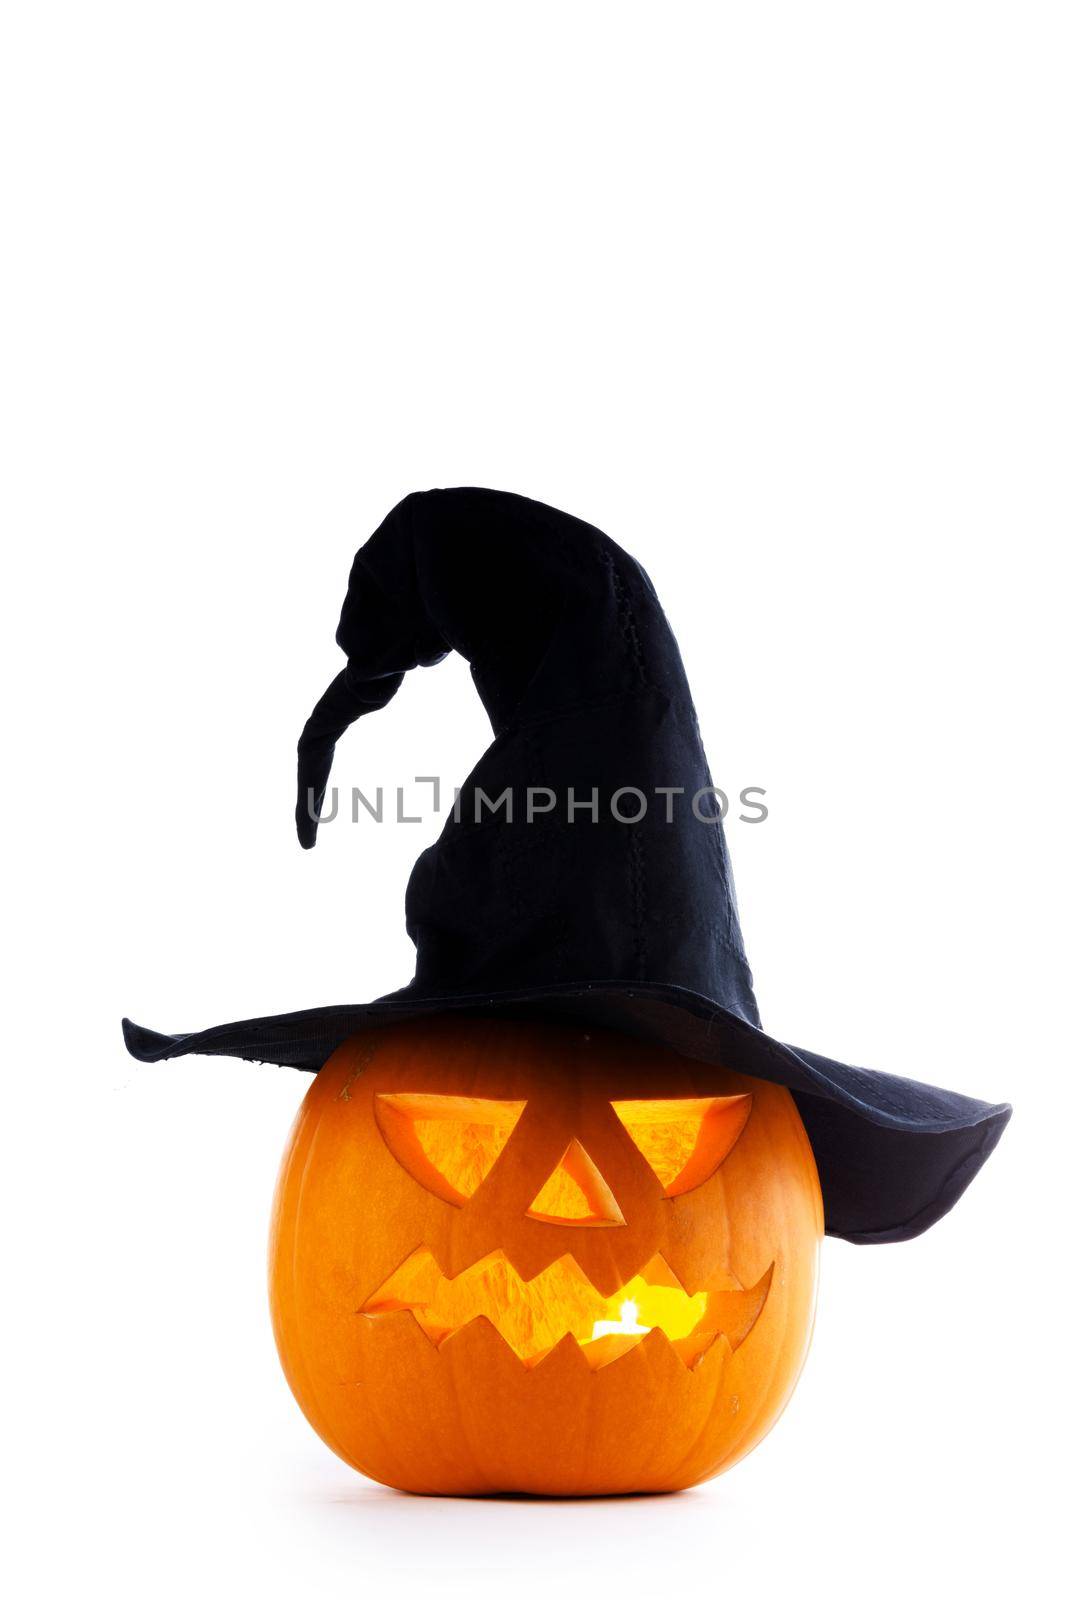 Funny Jack O Lantern Halloween pumpkin wearing witches hat isolated on white background